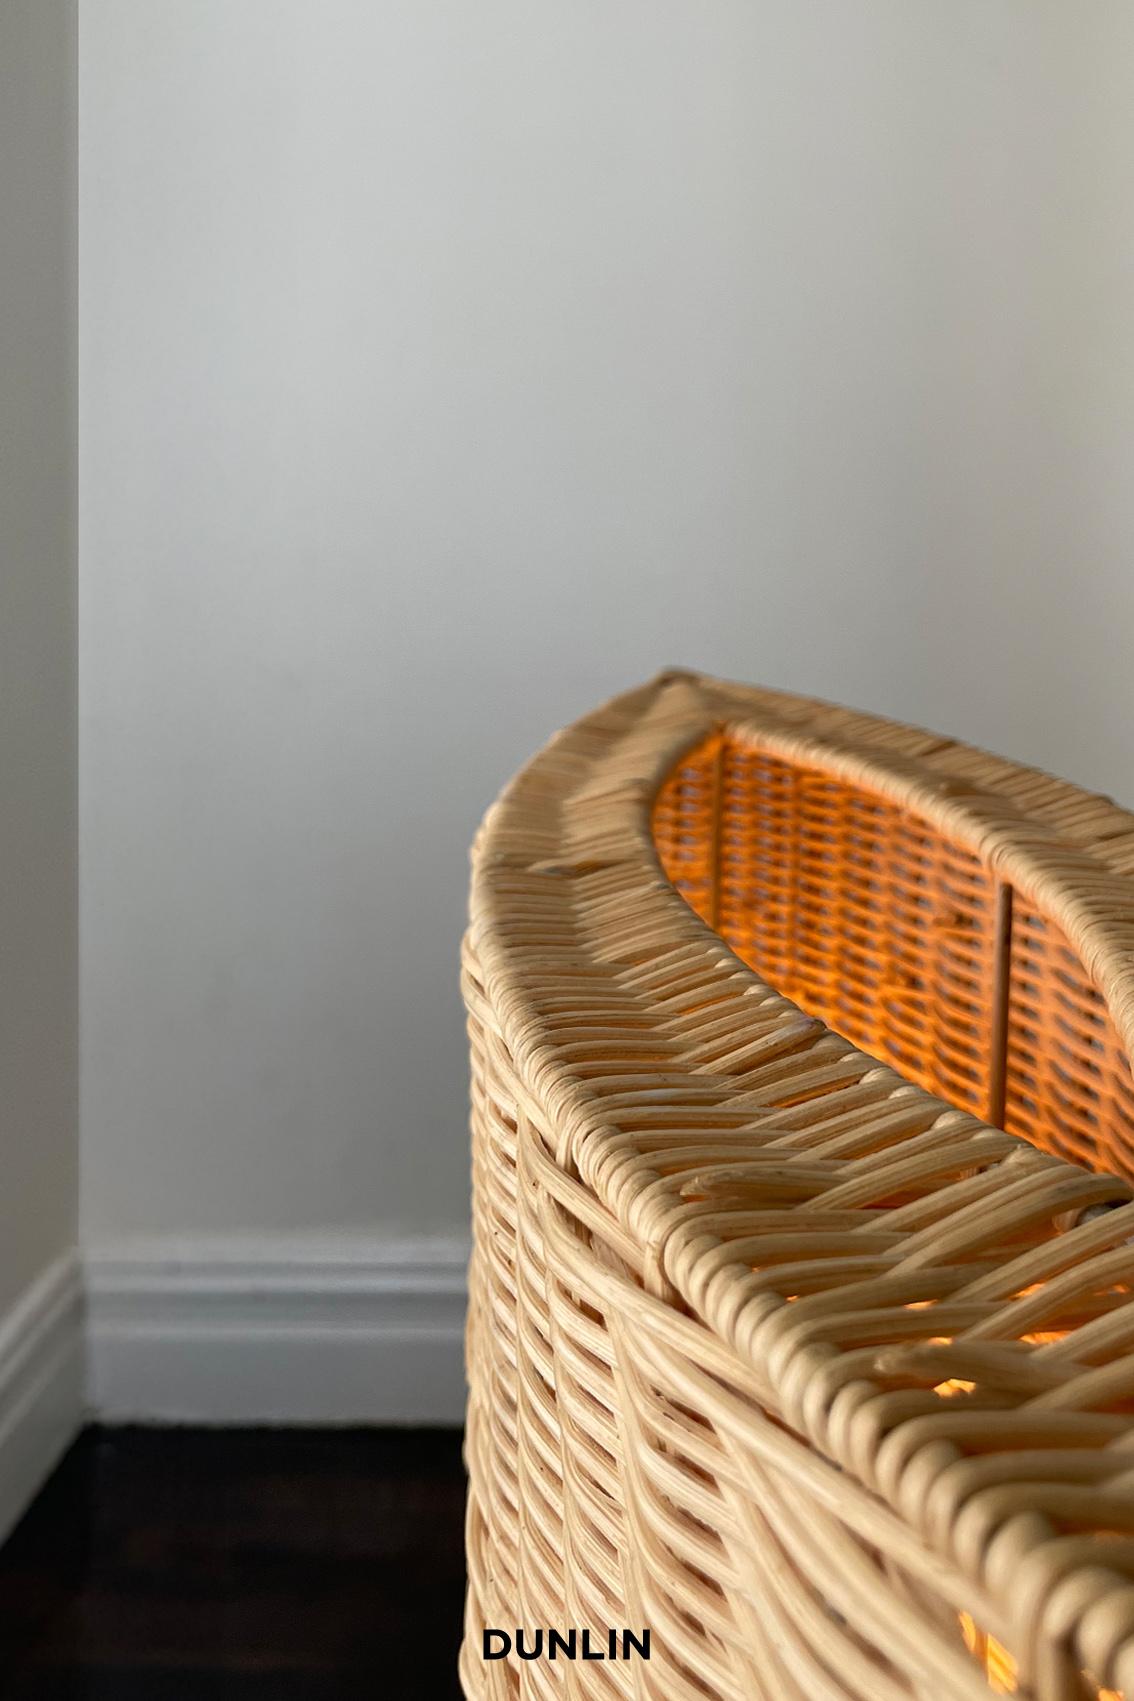 Organic Modern Rattan Luna Table Light 'Limited Edition', by Dunlin For Sale